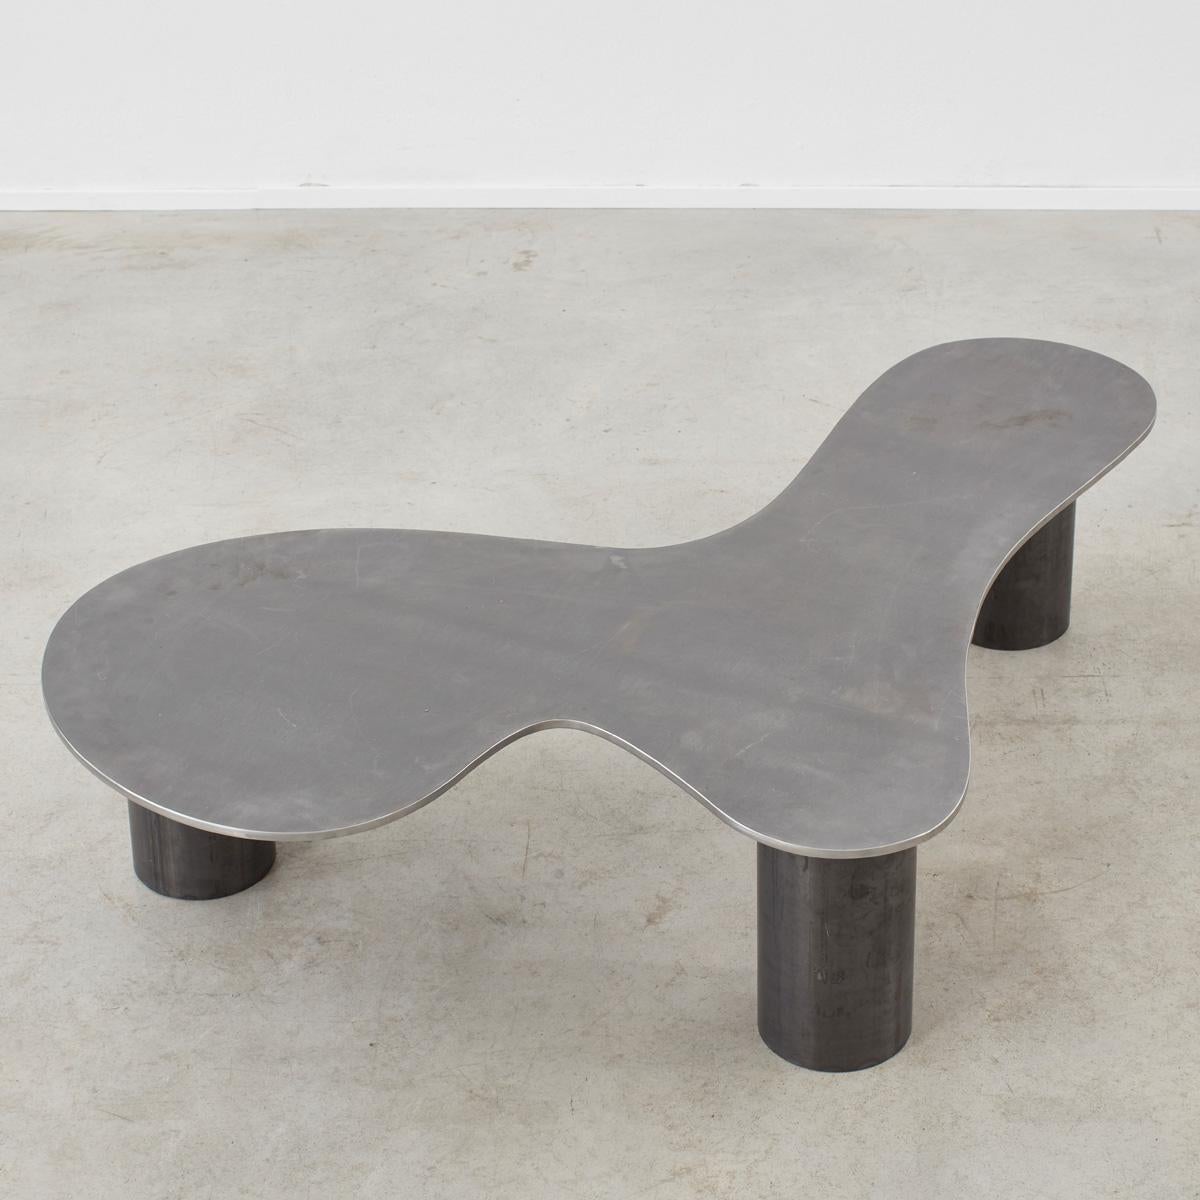 Steel Coffee Table 001 by Archive for Space, Stoke-on-Trent, UK, 2021 For Sale